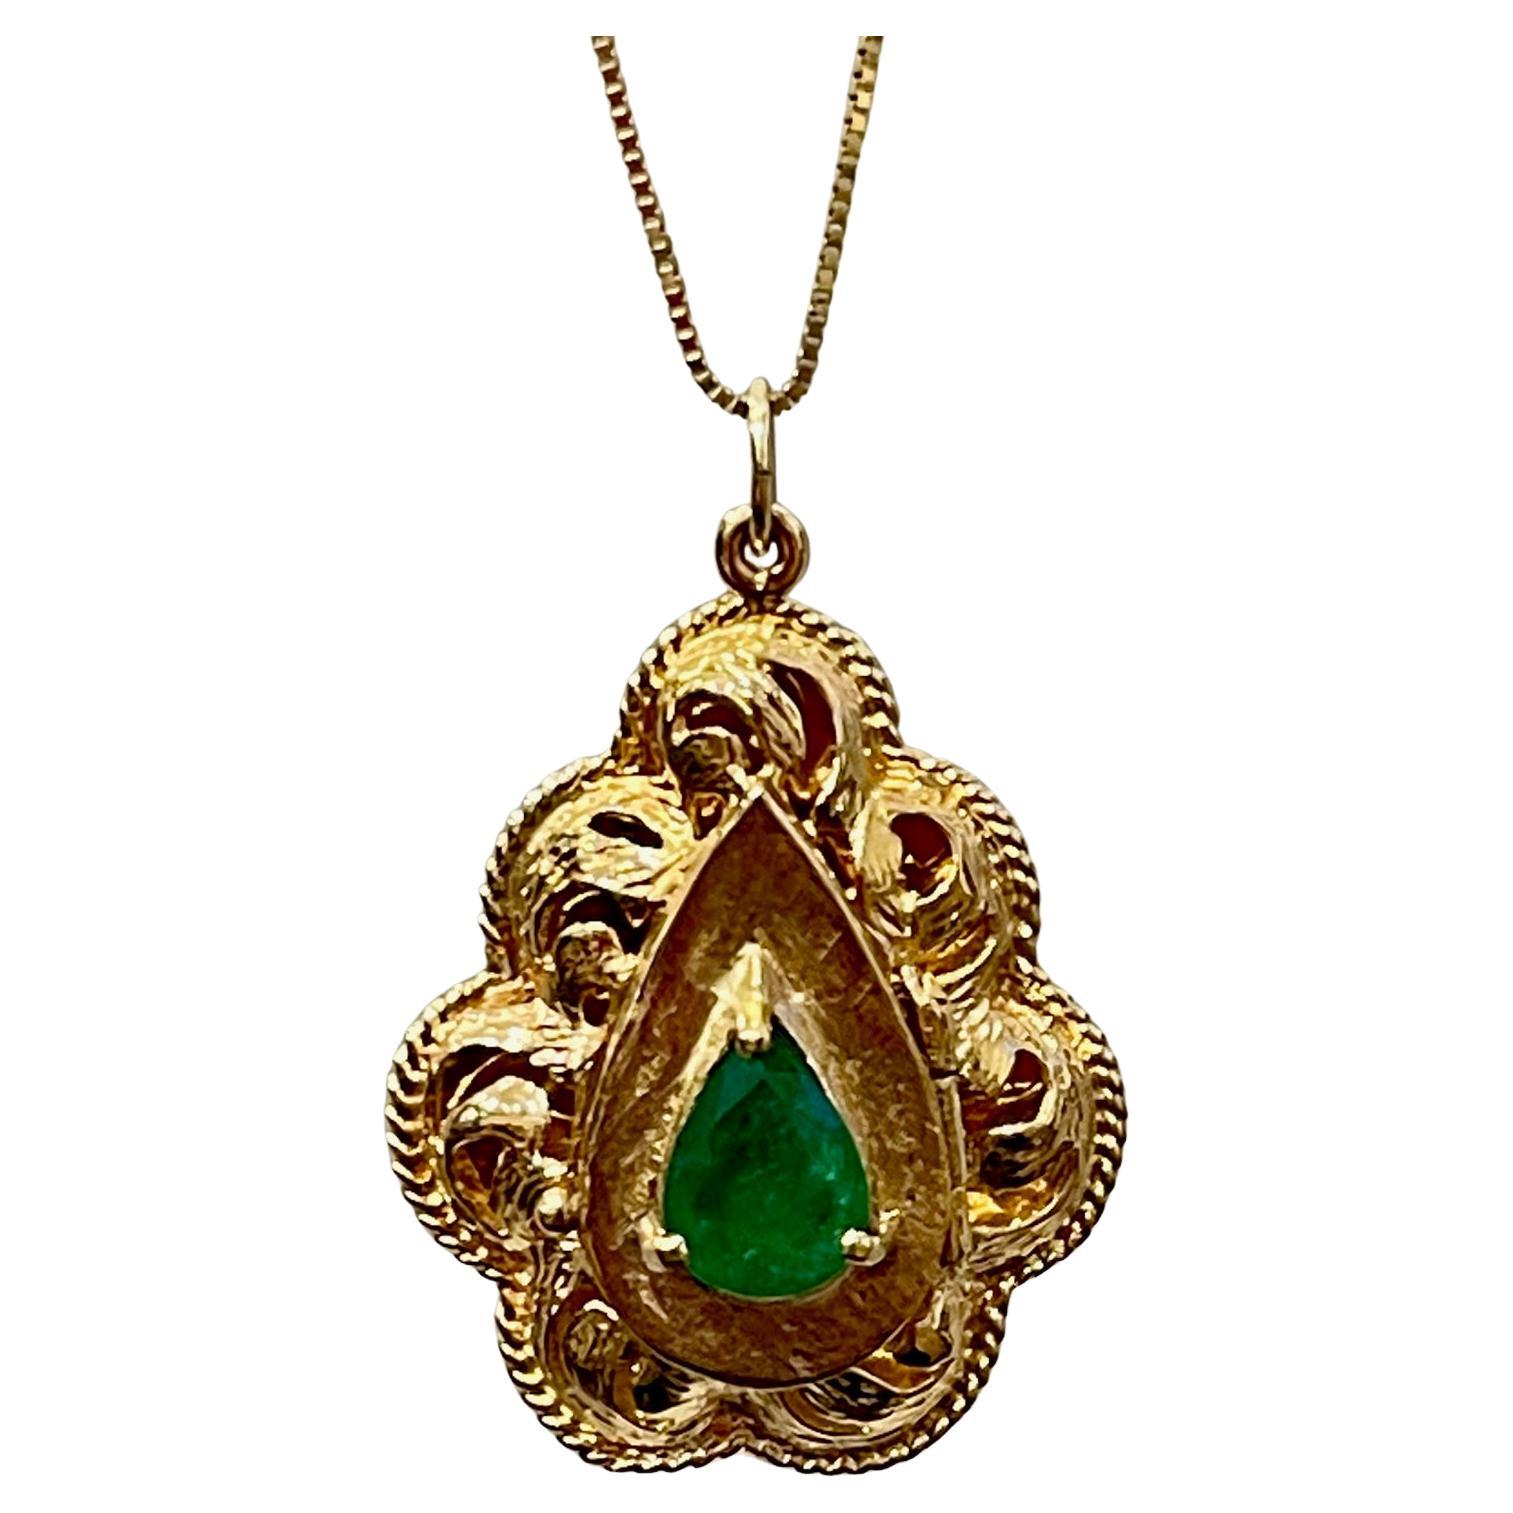 Vintage 14 Karat Yellow Gold 10.5 Gm Chain with Locket and Natural Emerald For Sale